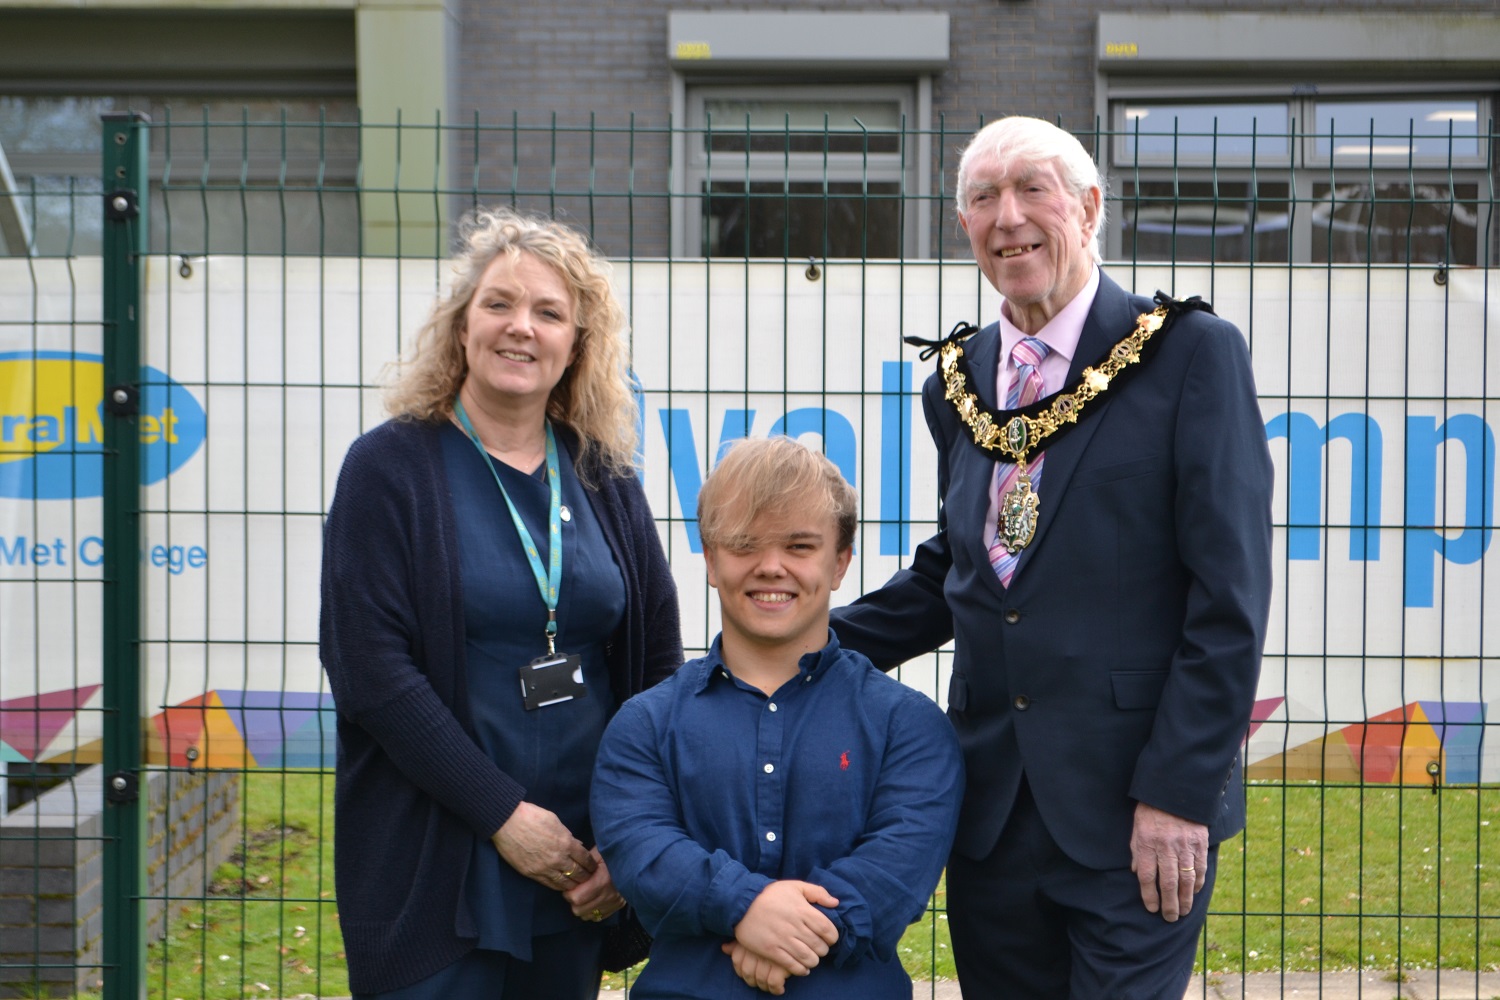 Matthew Harding (centre) with mum Michelle and Mayor of Wirral, councillor George Davies.